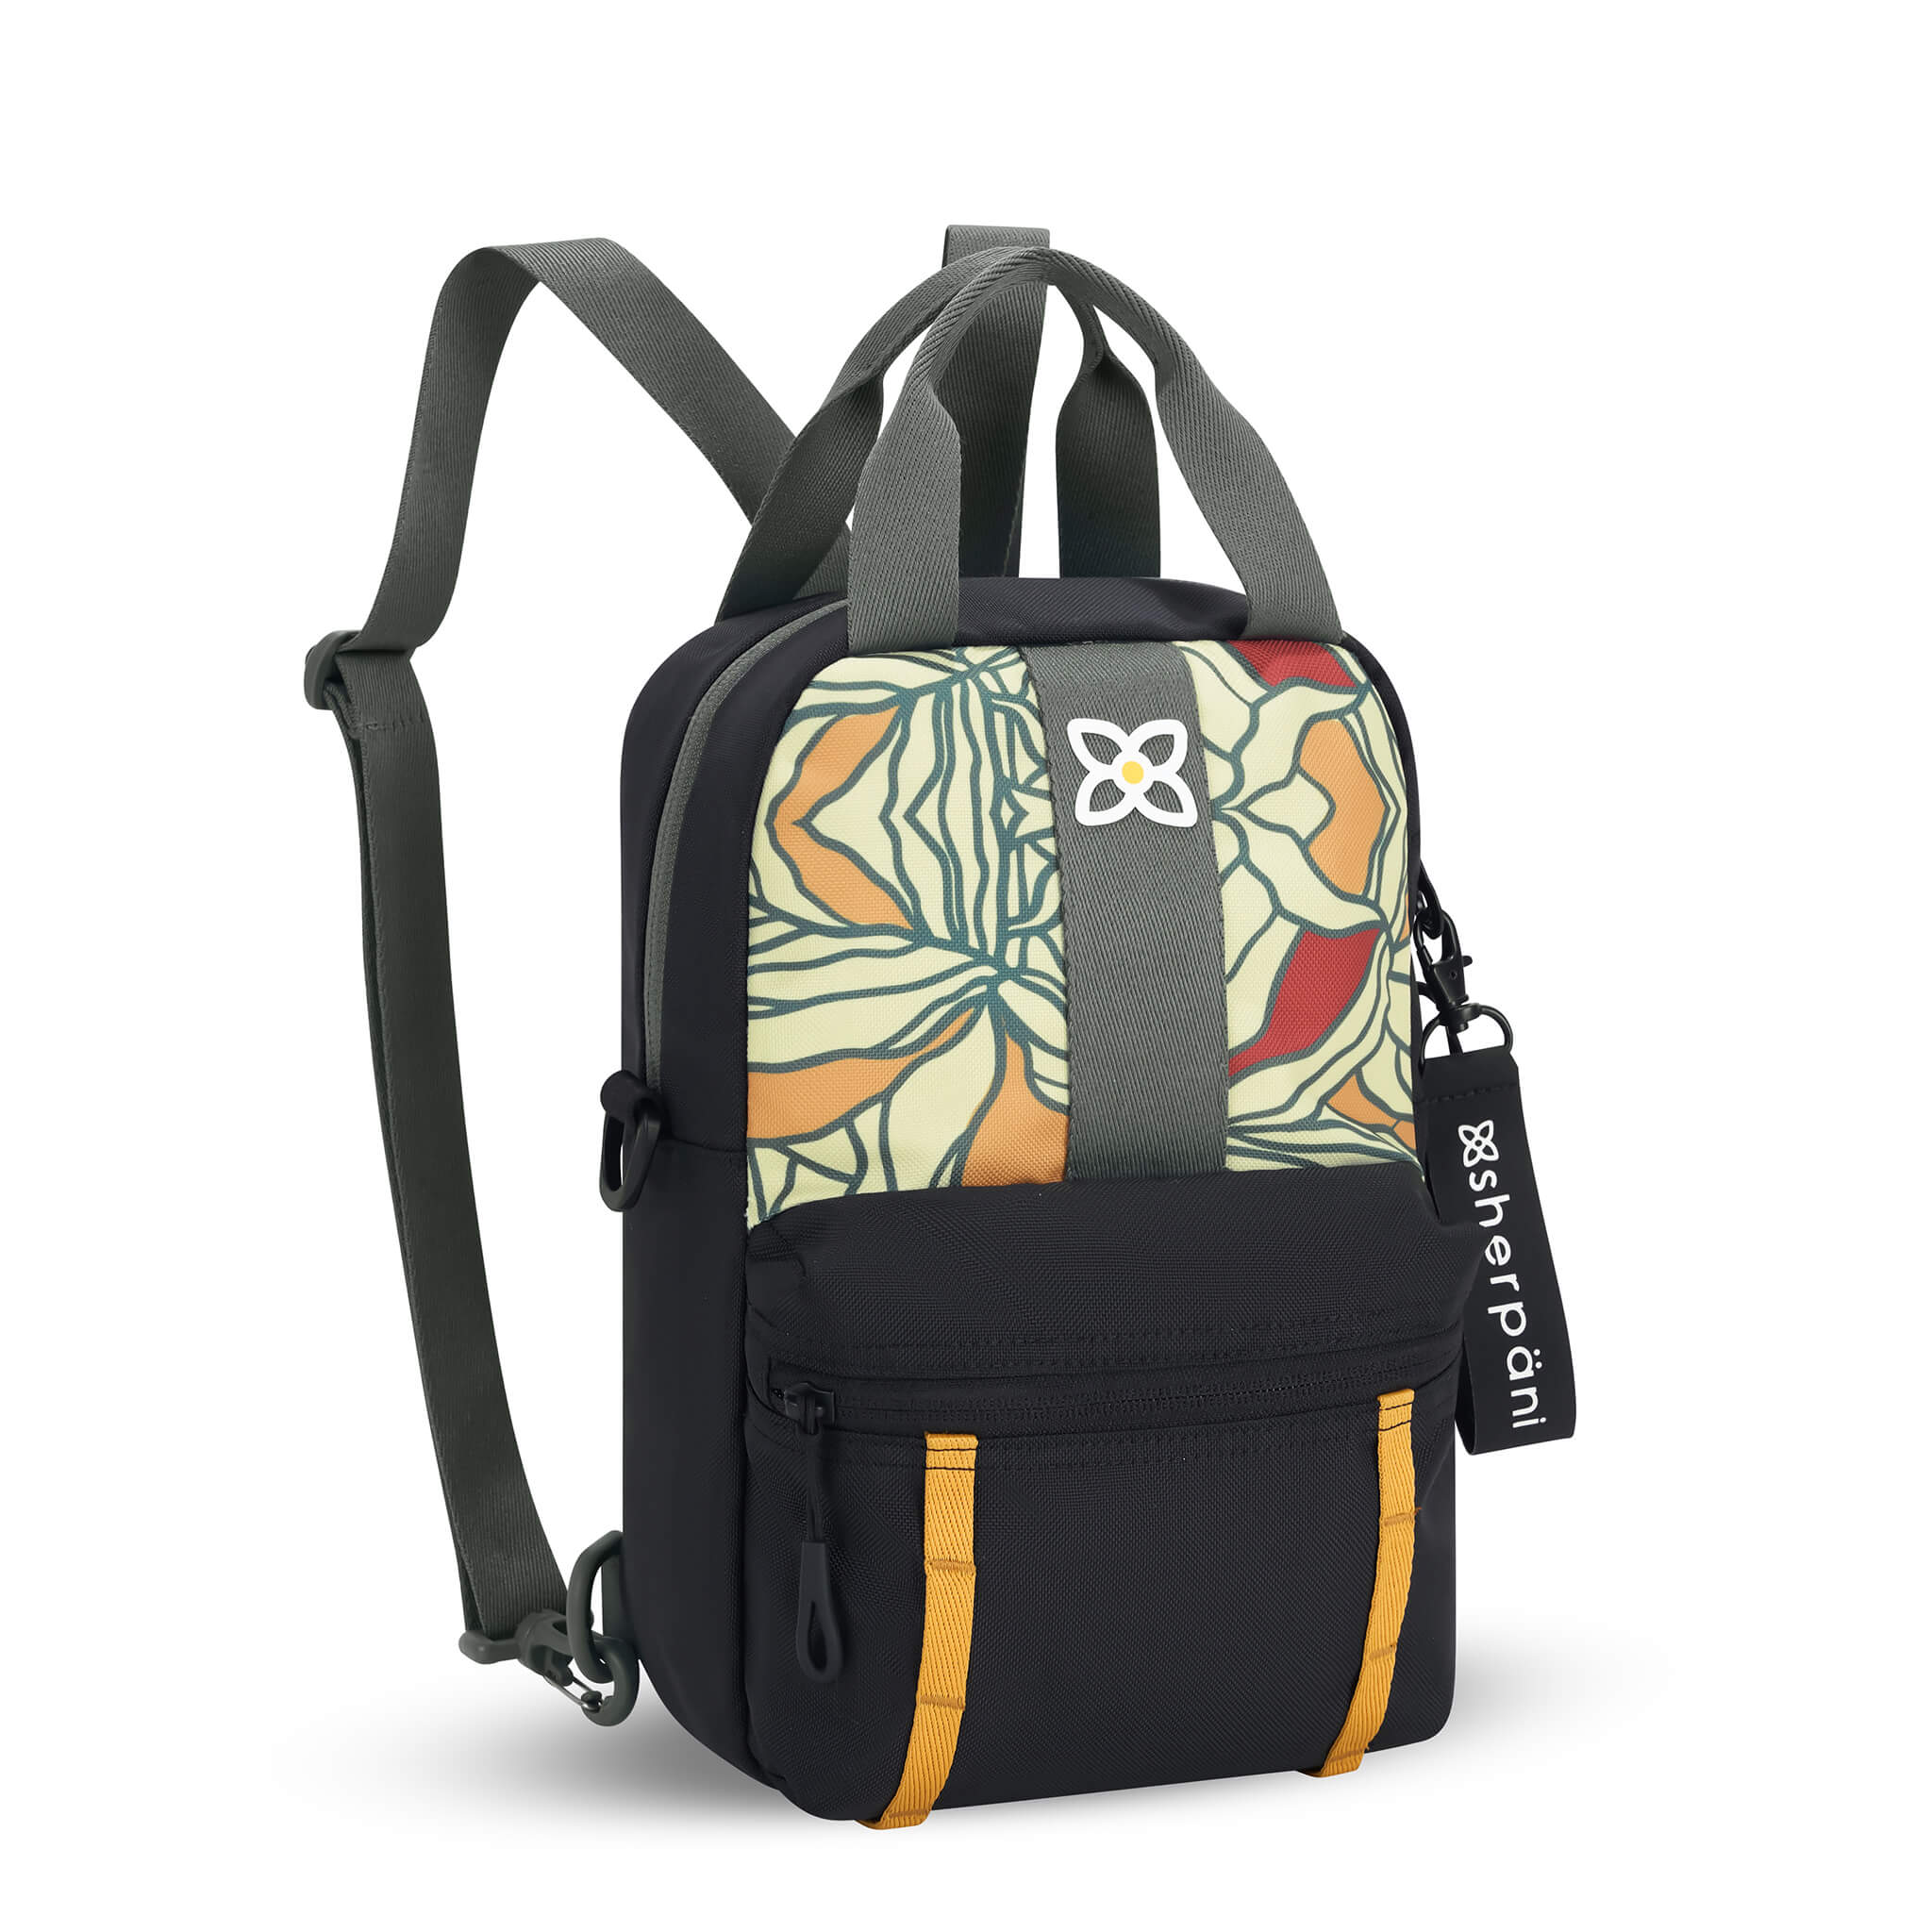 Angled front view of Sherpani mini backpack the Logan in Fiori. The bag is black and gray with an accented daisy chain in yellow. The front panel features a multi-colored floral pattern. The Logan has fixed tote handles and adjustable backpack straps. 